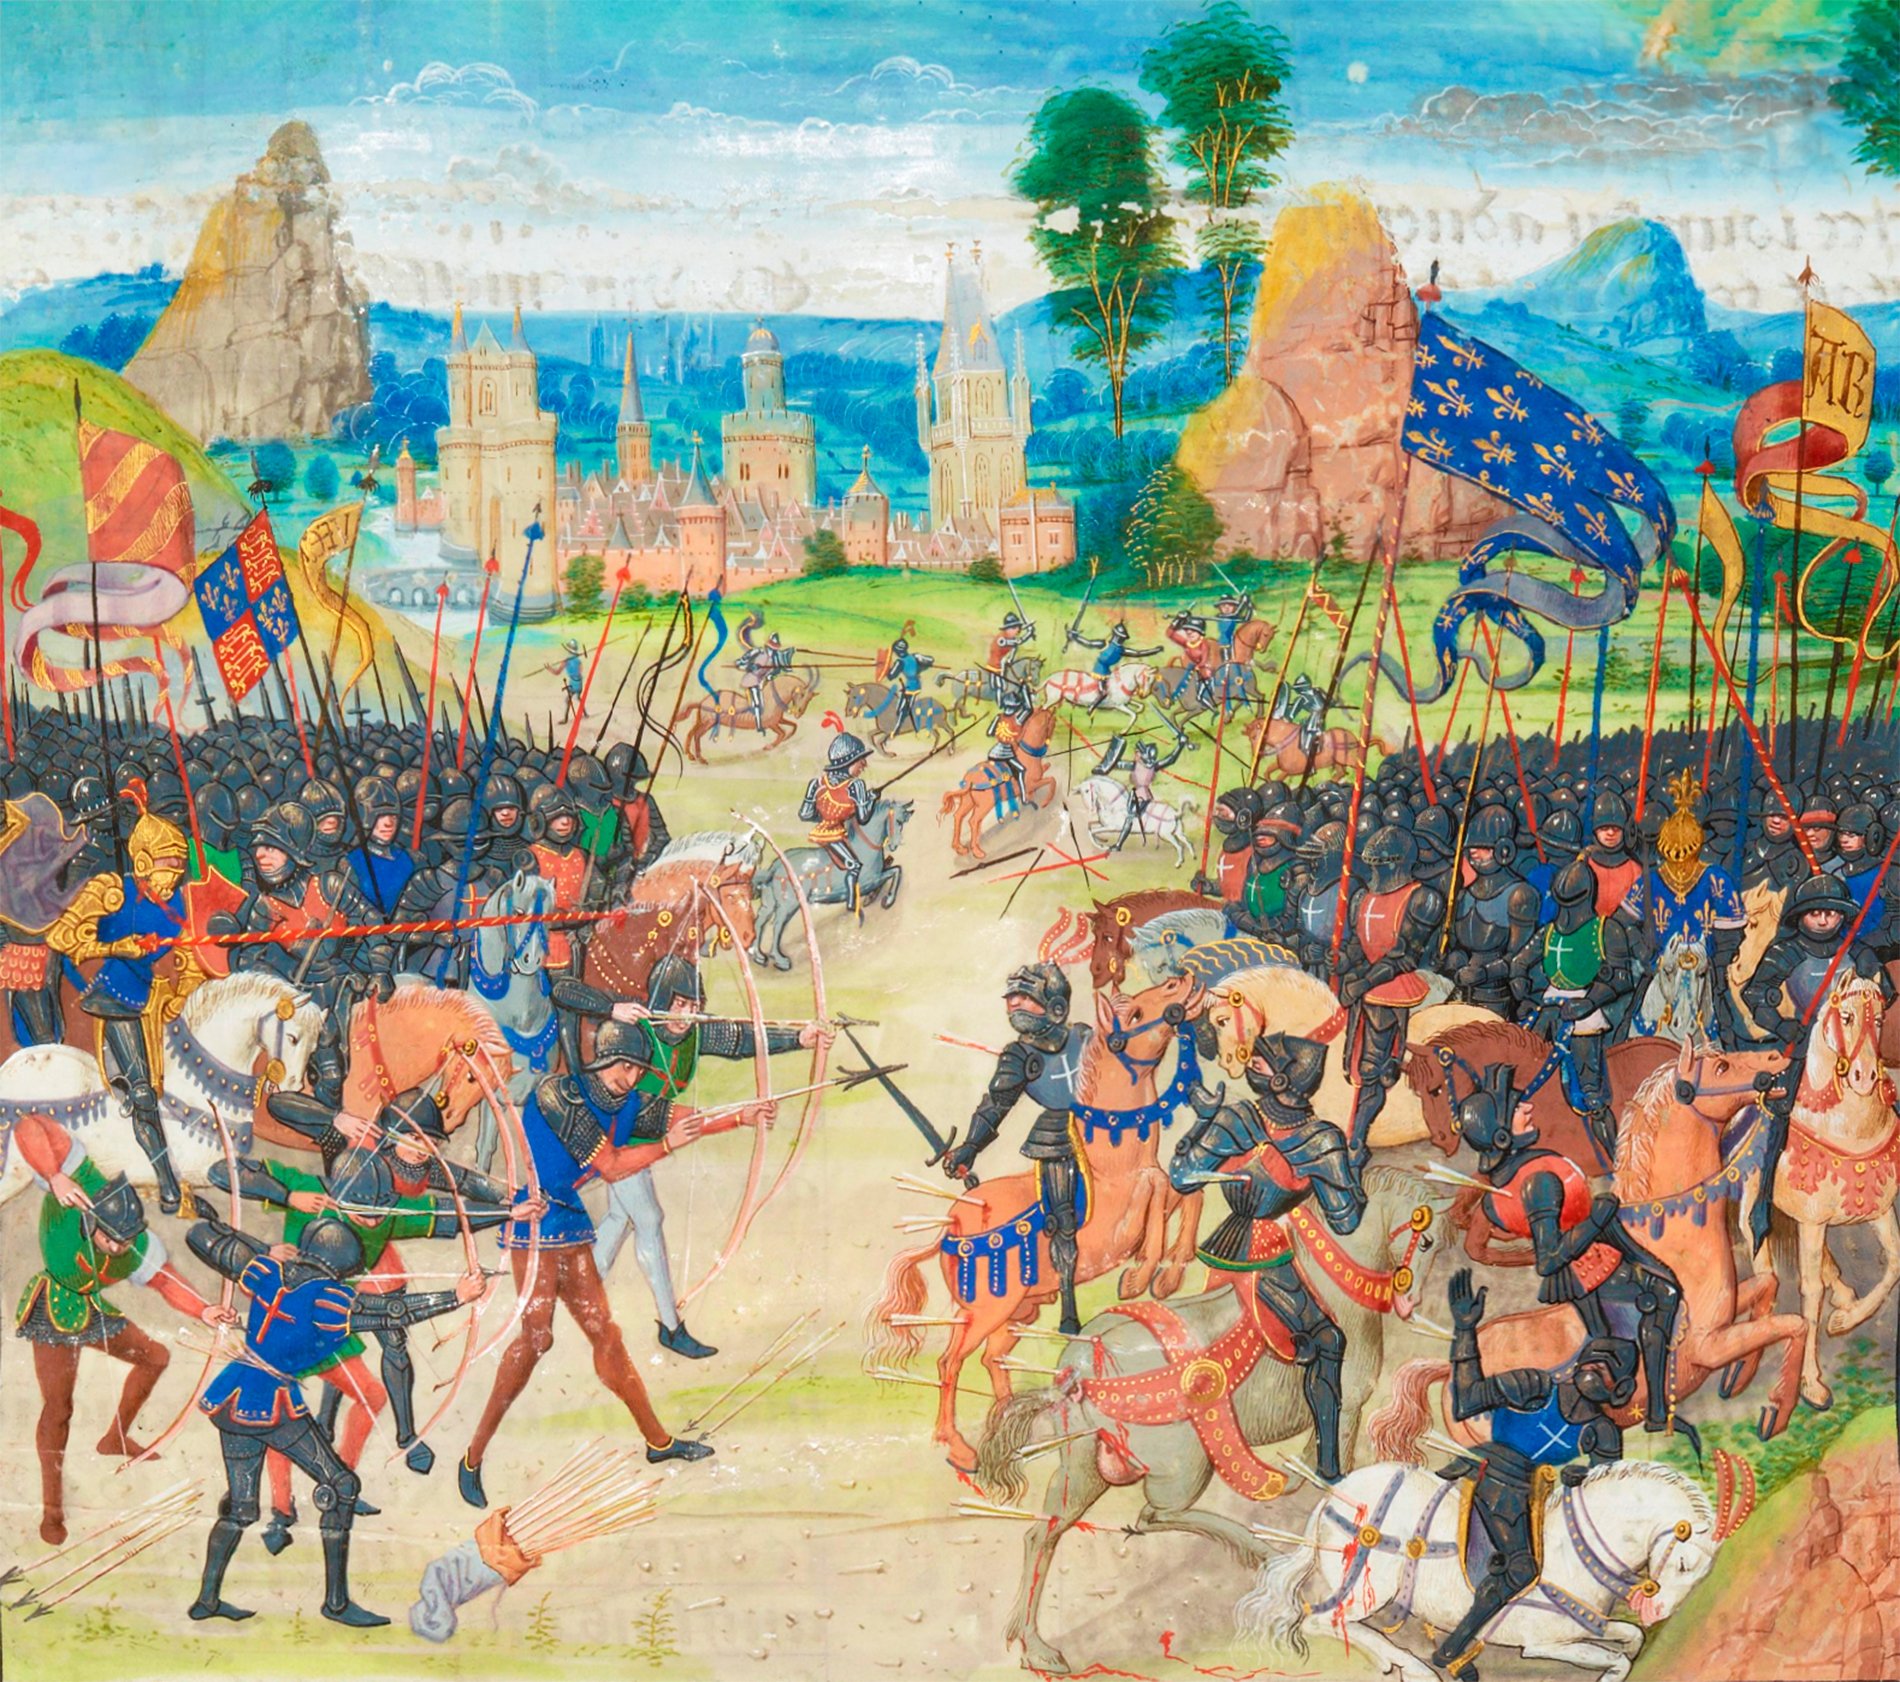 Illuminated manuscript painting from Froissart's Chronicles depicting the Battle of Poitiers at Nouaillé-Maupertuis in 1356, part of the Gruuthuse Manuscripts collection. The artwork shows the English army on the left side, engaging with the French troops on the right. Vivid colors illustrate the combatants in armor, with flags and banners representing each side's heraldry. The background features a detailed medieval landscape with castles, rocky formations, and lush greenery under a blue sky.